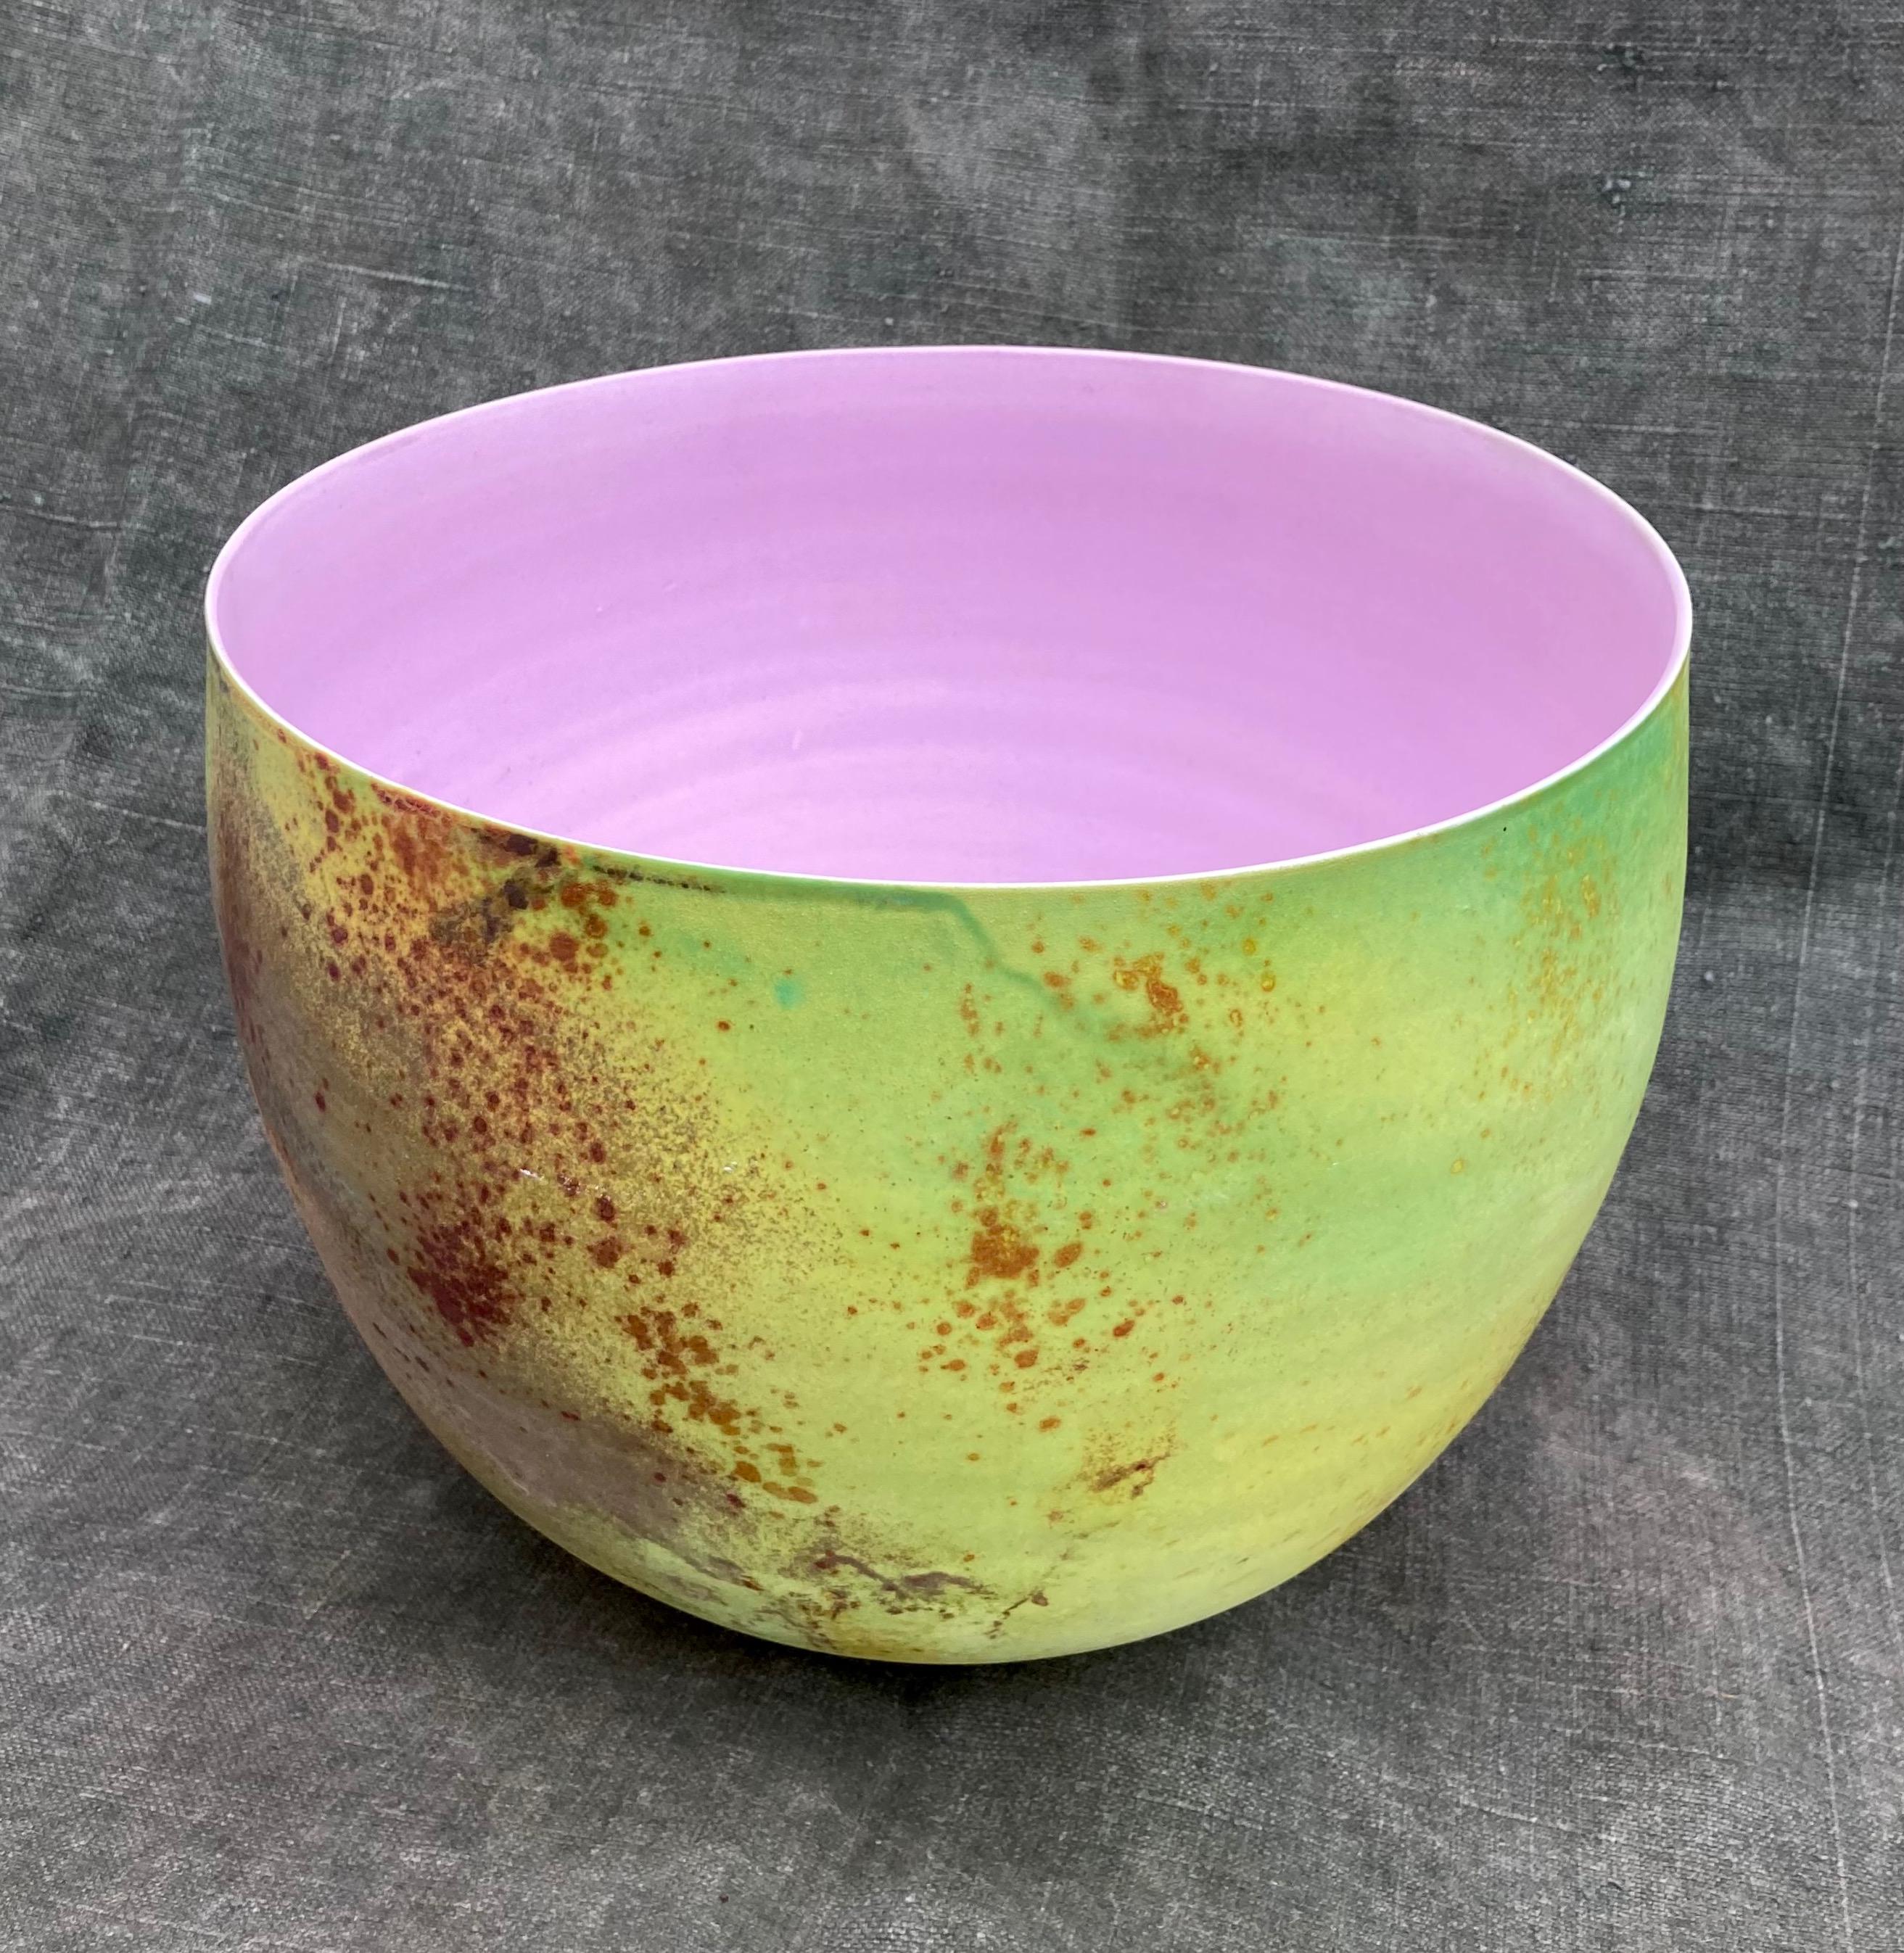 A stunning and extremely beautiful porcelain bowl by Swedish ceramic master Per Hammarström. Modern glazes that turns it into a standout piece.

Per Hammarström was Berndt Friberg´s last apprentice at Gustavsberg at the end of the 70´s. He went on